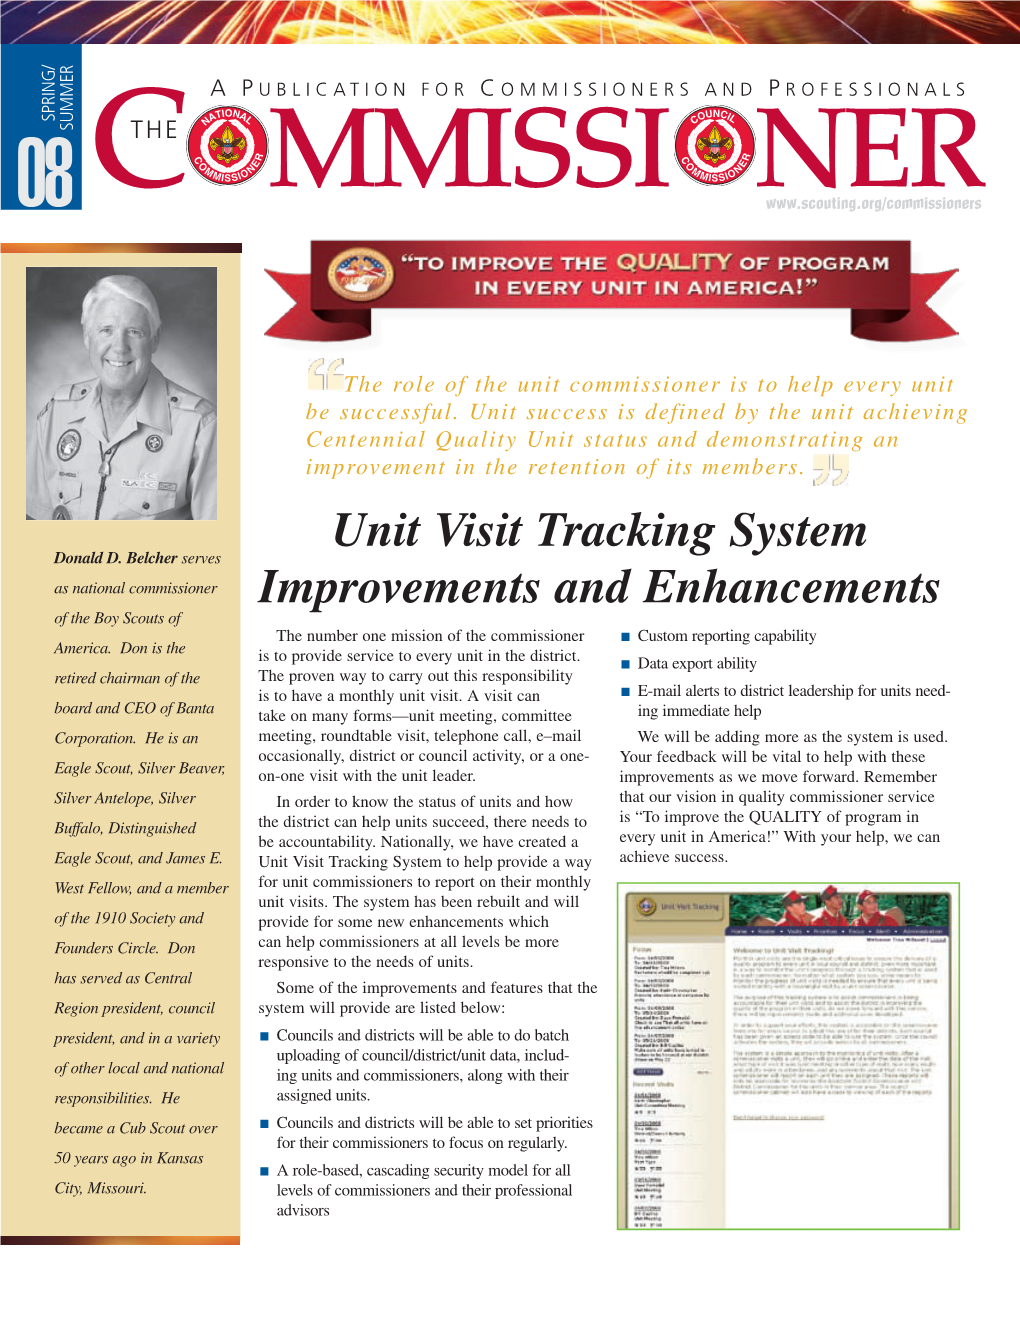 Unit Visit Tracking System Improvements and Enhancements